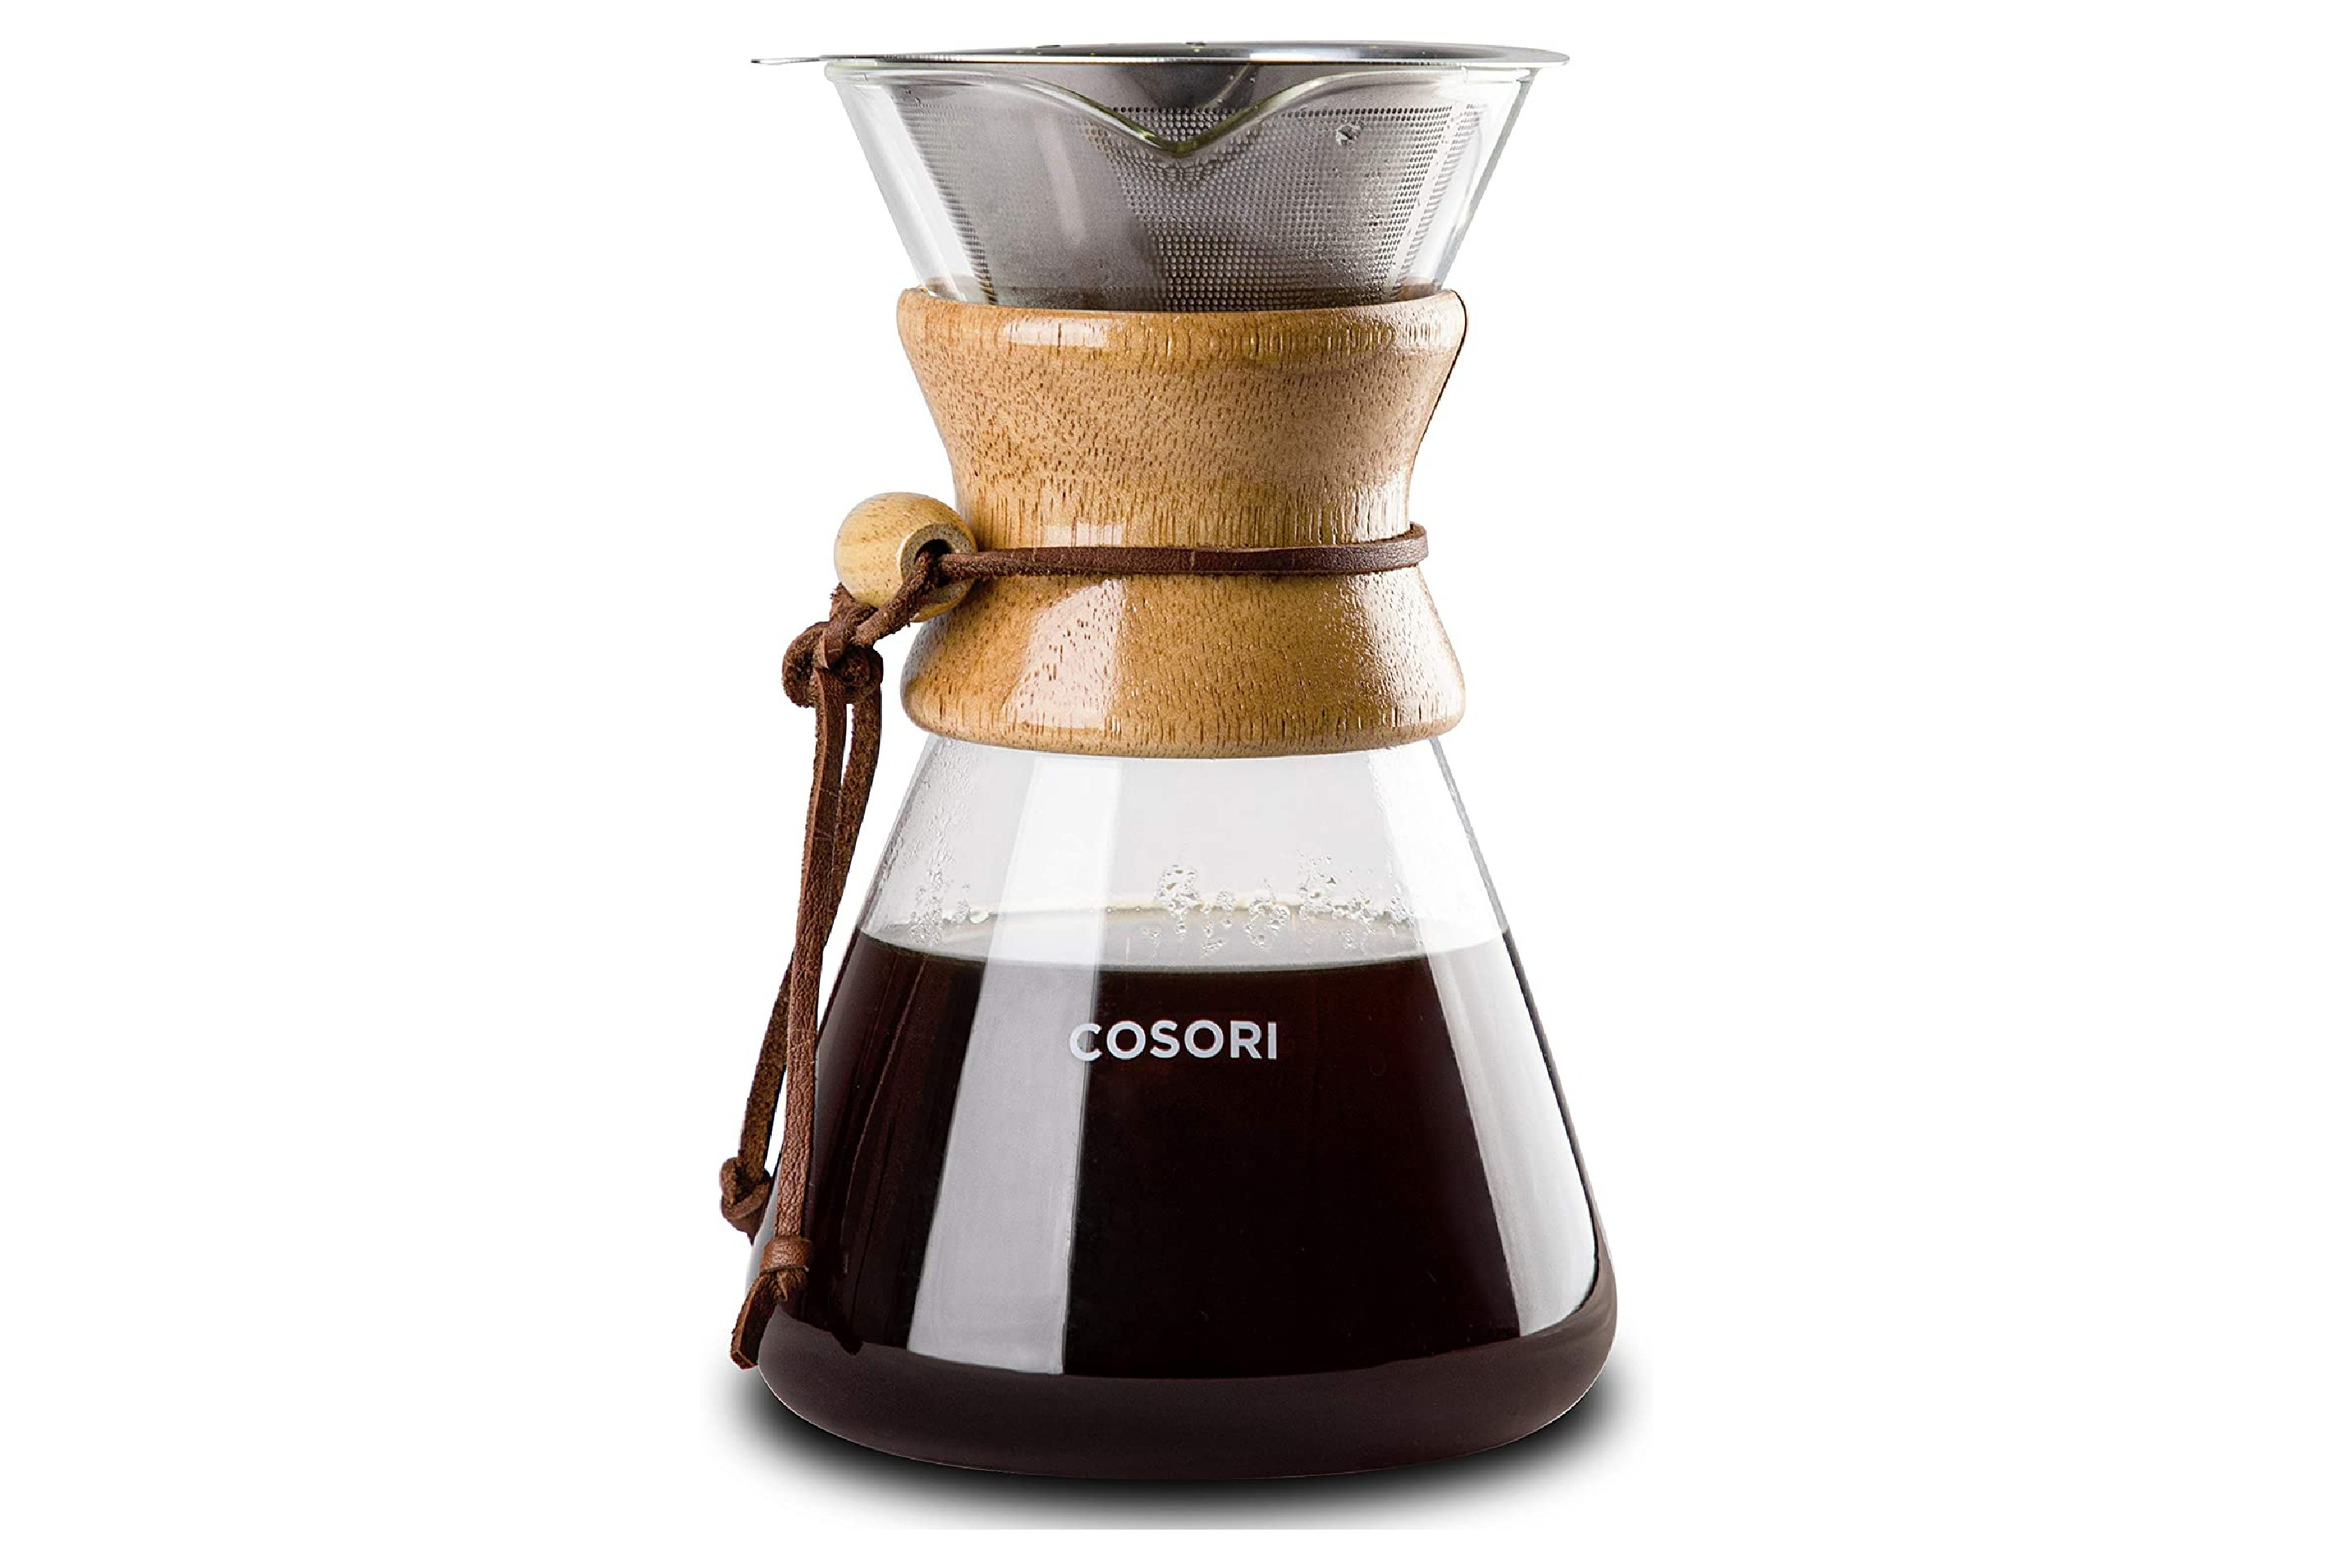 COSORI Pour Over Coffee Maker with Double-layer Stainless Steel Filter